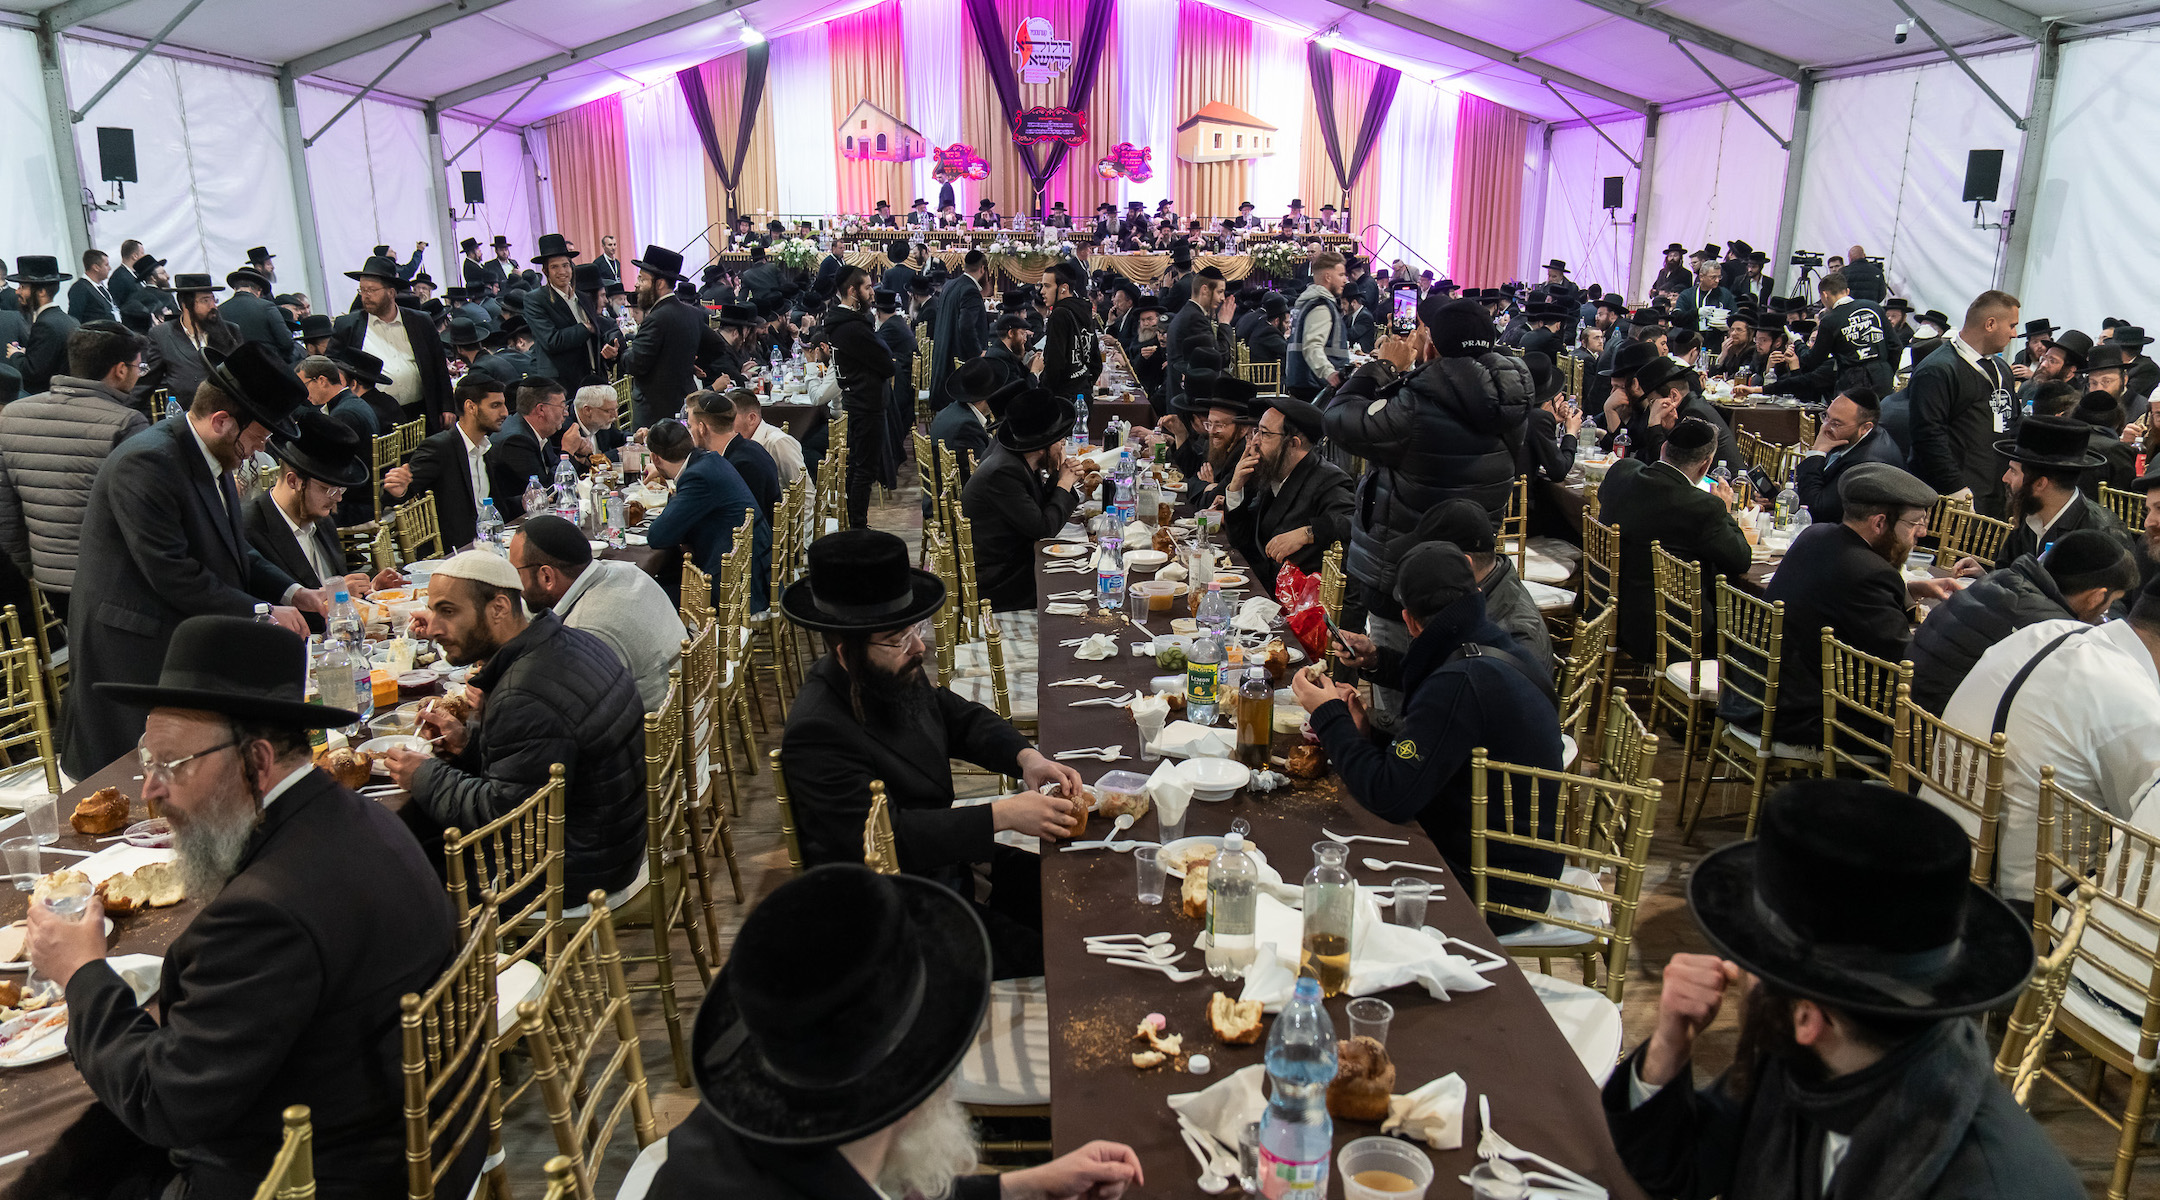 Orthodox Jews gather for a meal in Bodrogkeresztur, Hungary, during an annual pilgrimage to the town that was the home of Rabbi Yeshaya Steiner, also known as Rabbi Shayele. (Barnabas Horvath)